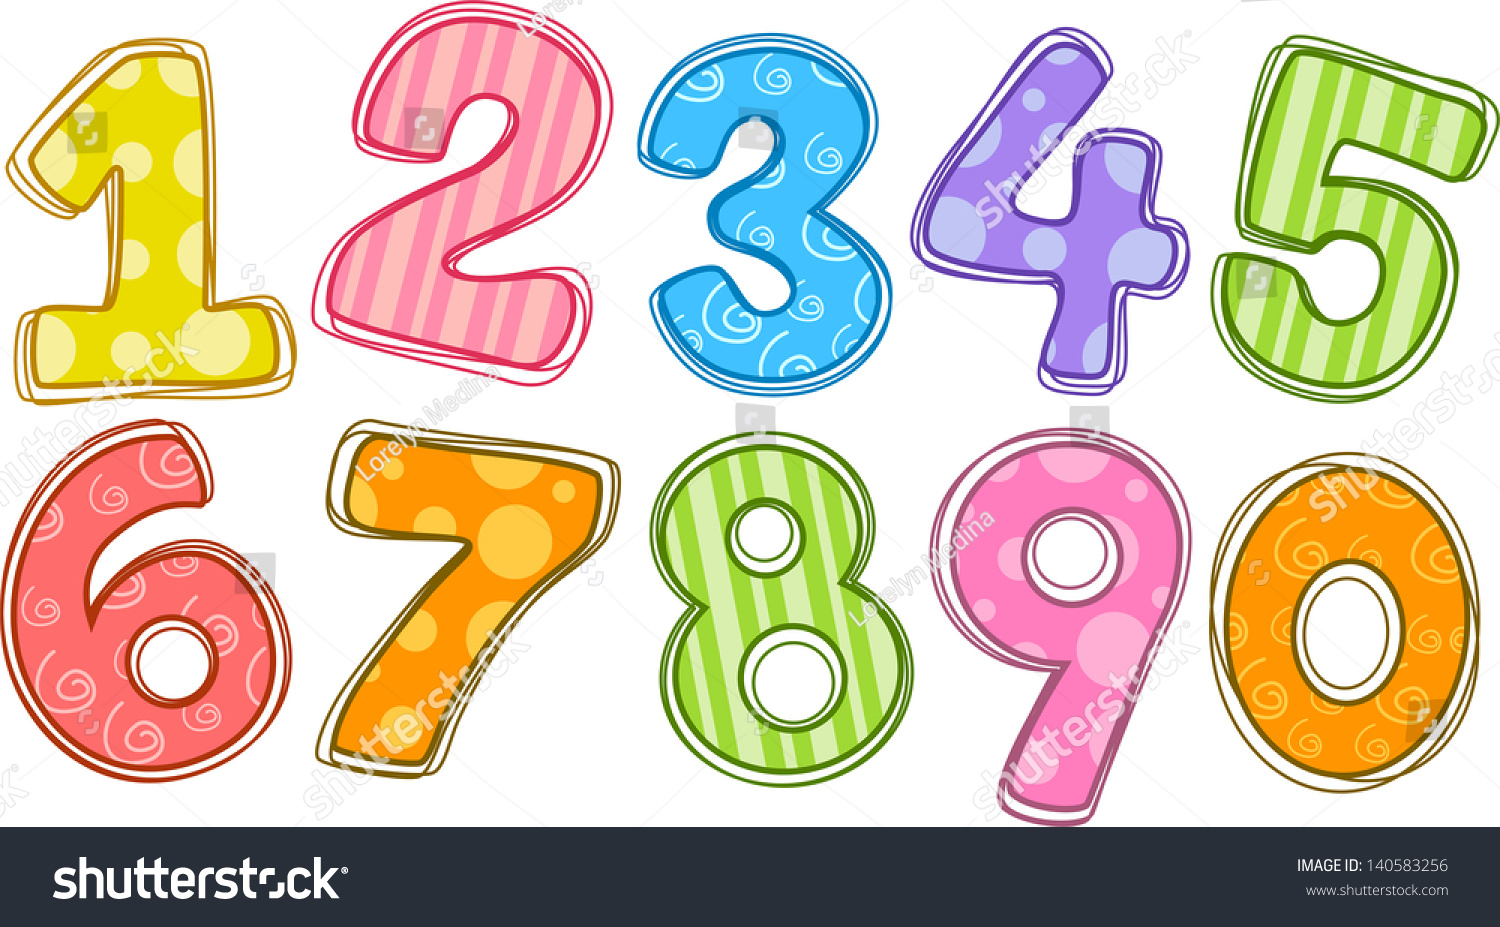 free colorful numbers clipart - photo #13